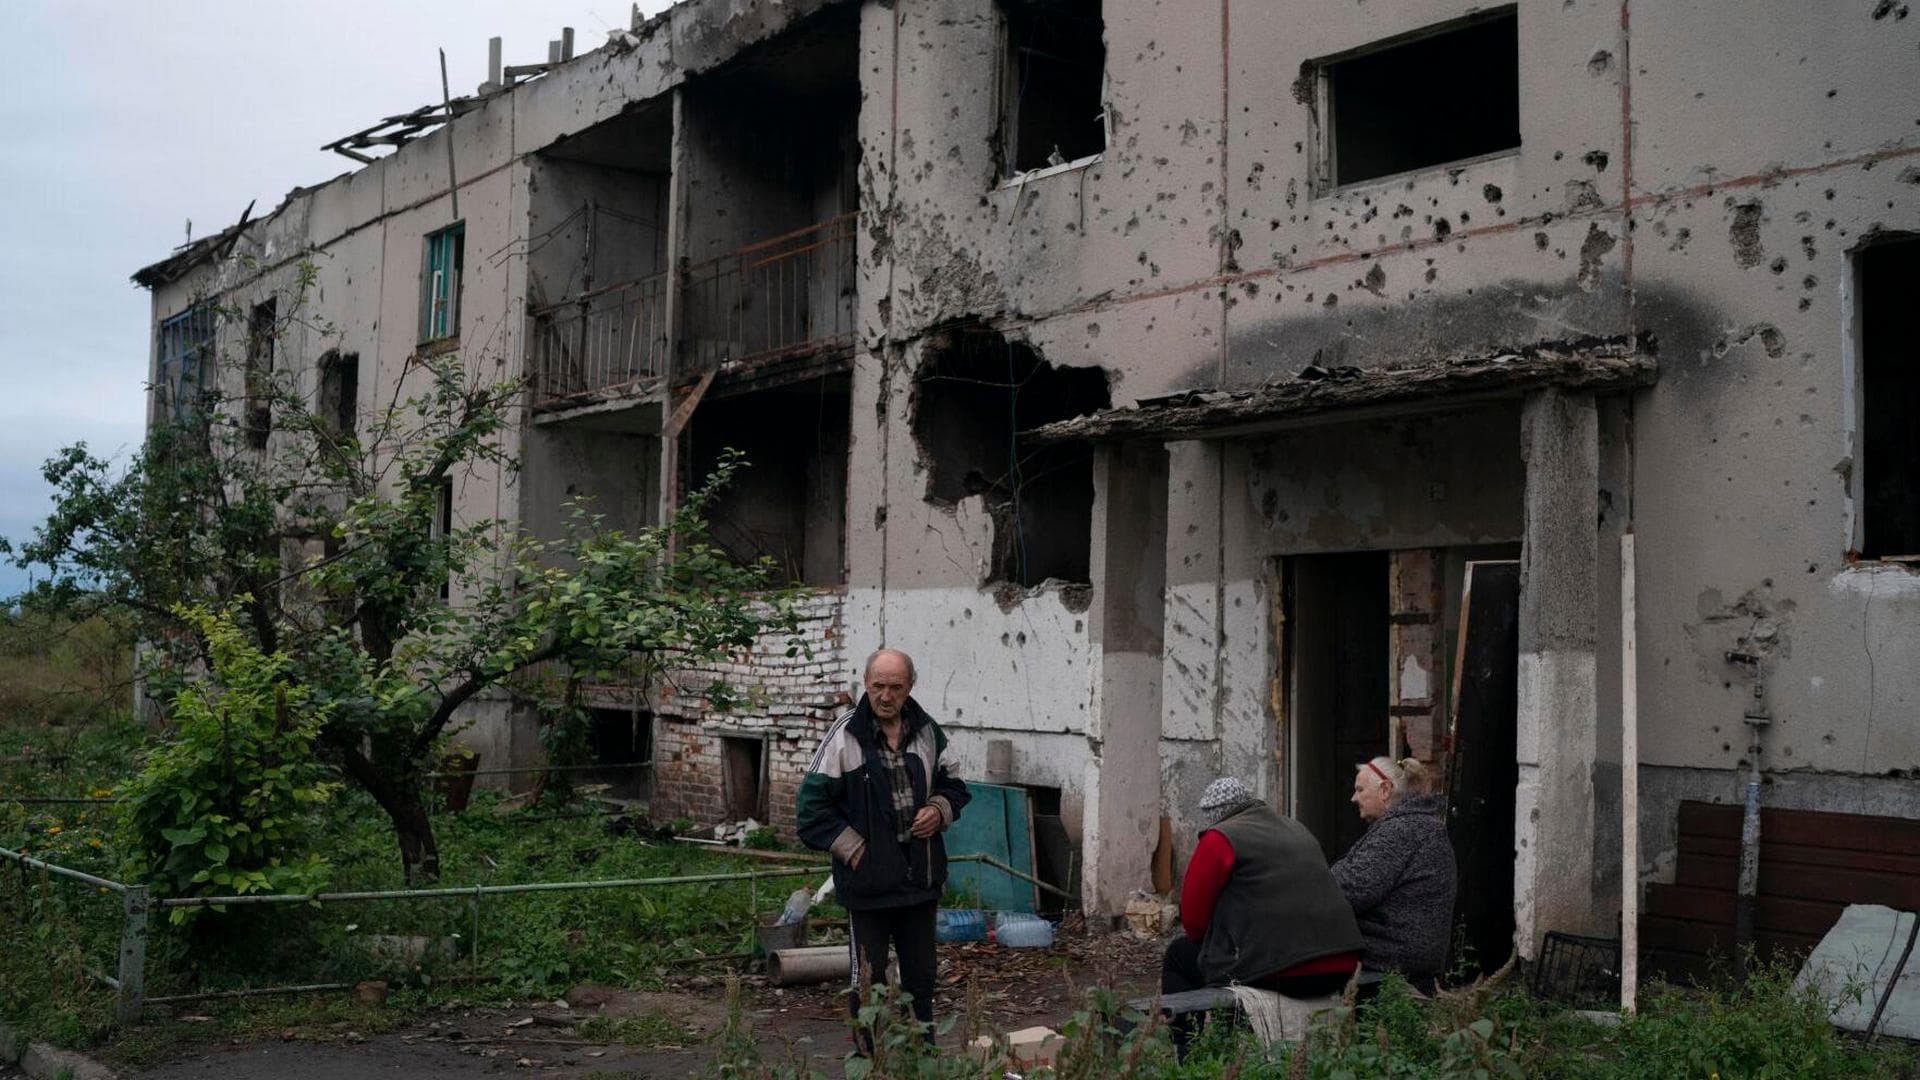 Oleh Lutsai stands with his neighbors at the entrance of their damaged residential building in the freed village of Hrakove